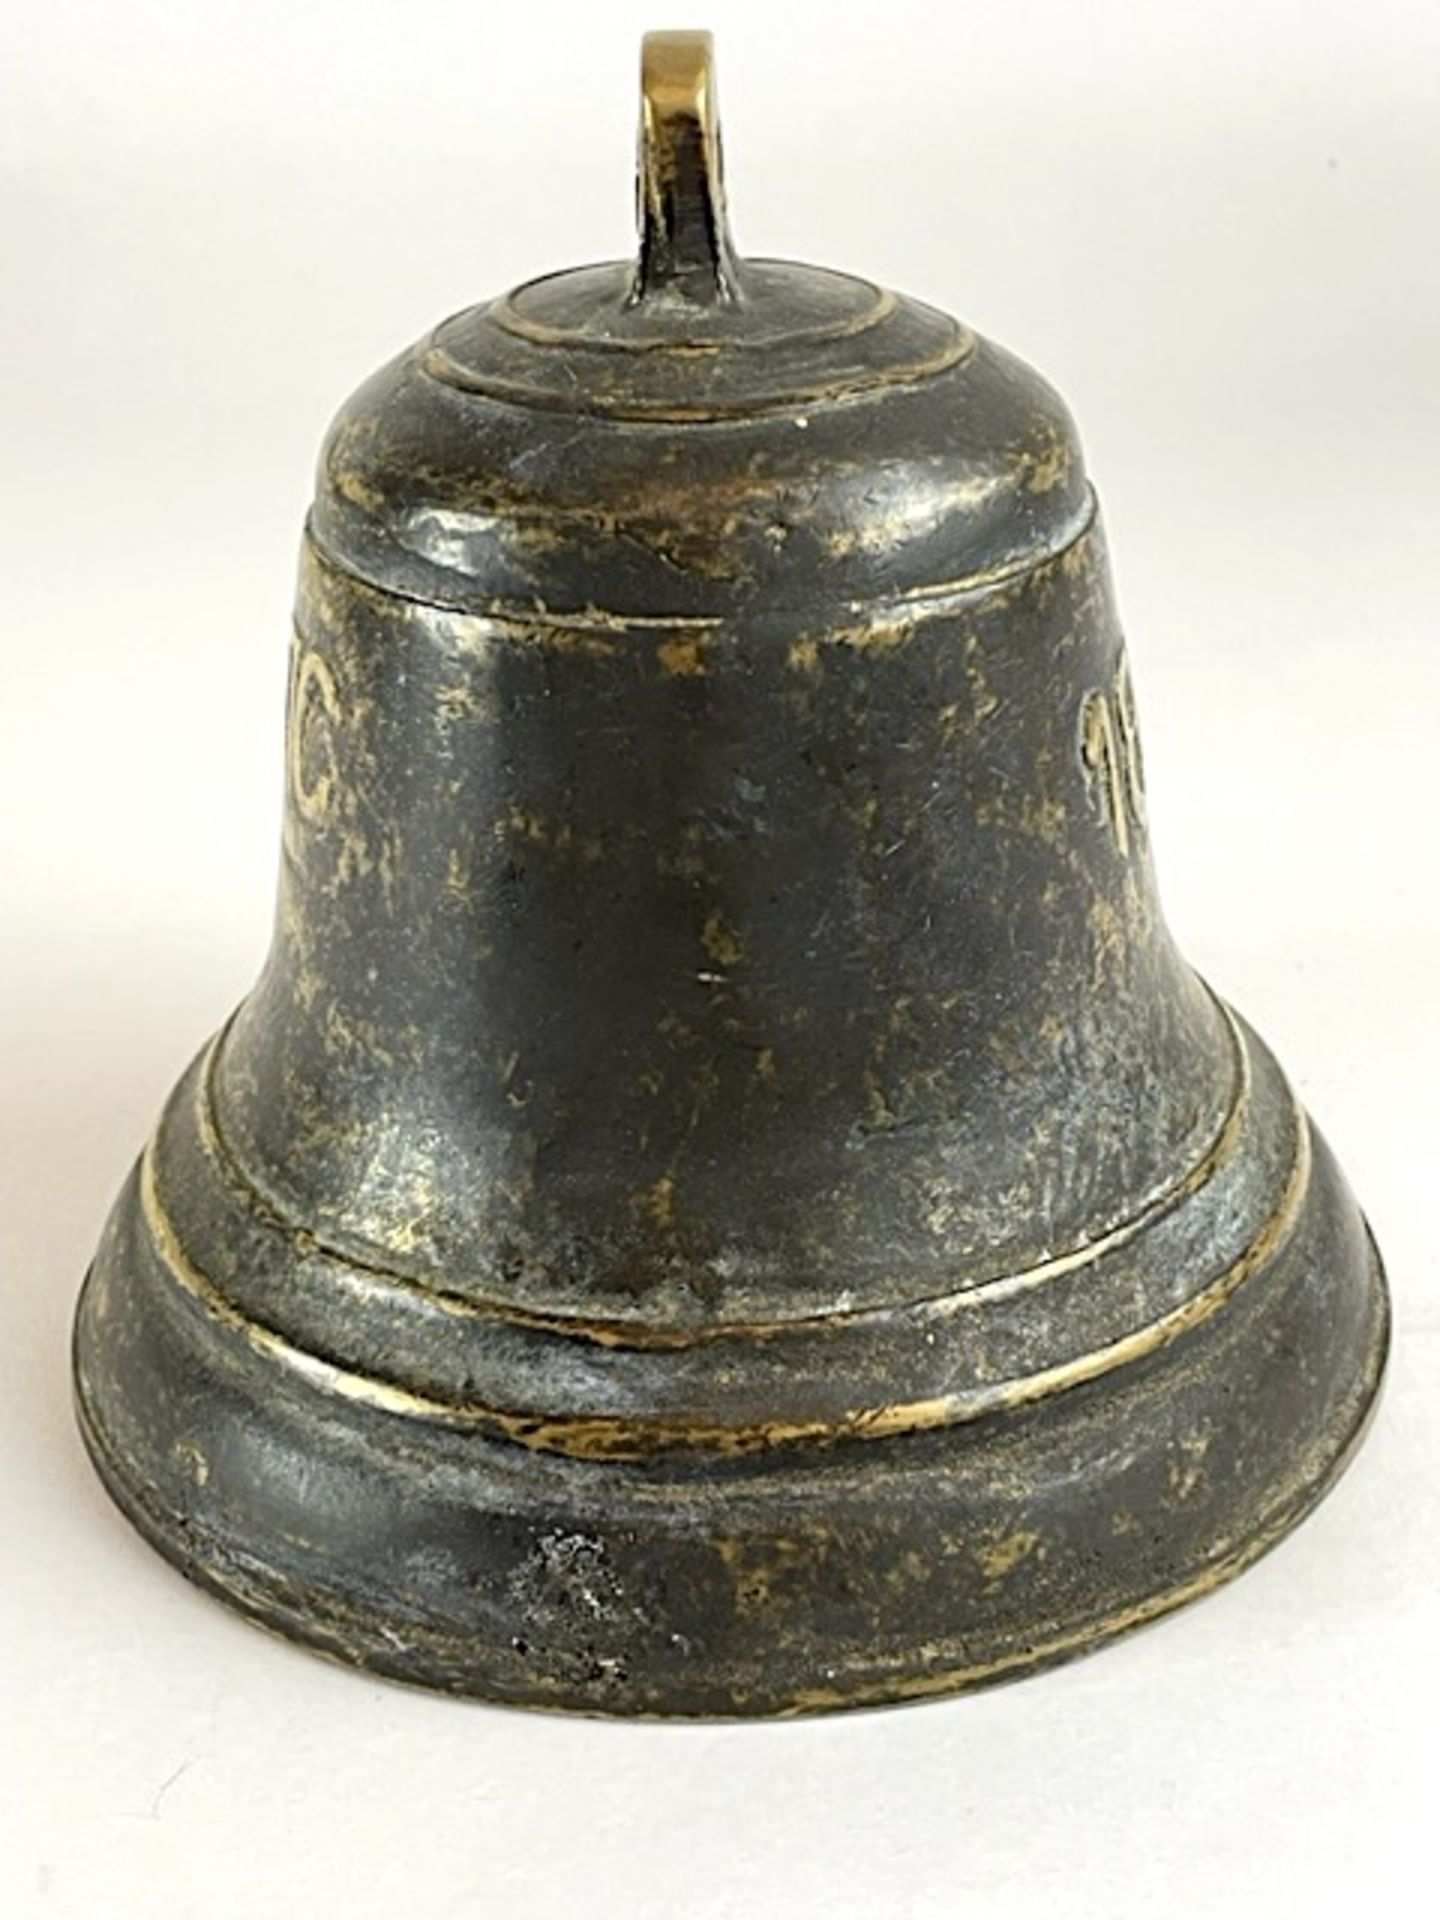 Ship's bell - Image 2 of 11